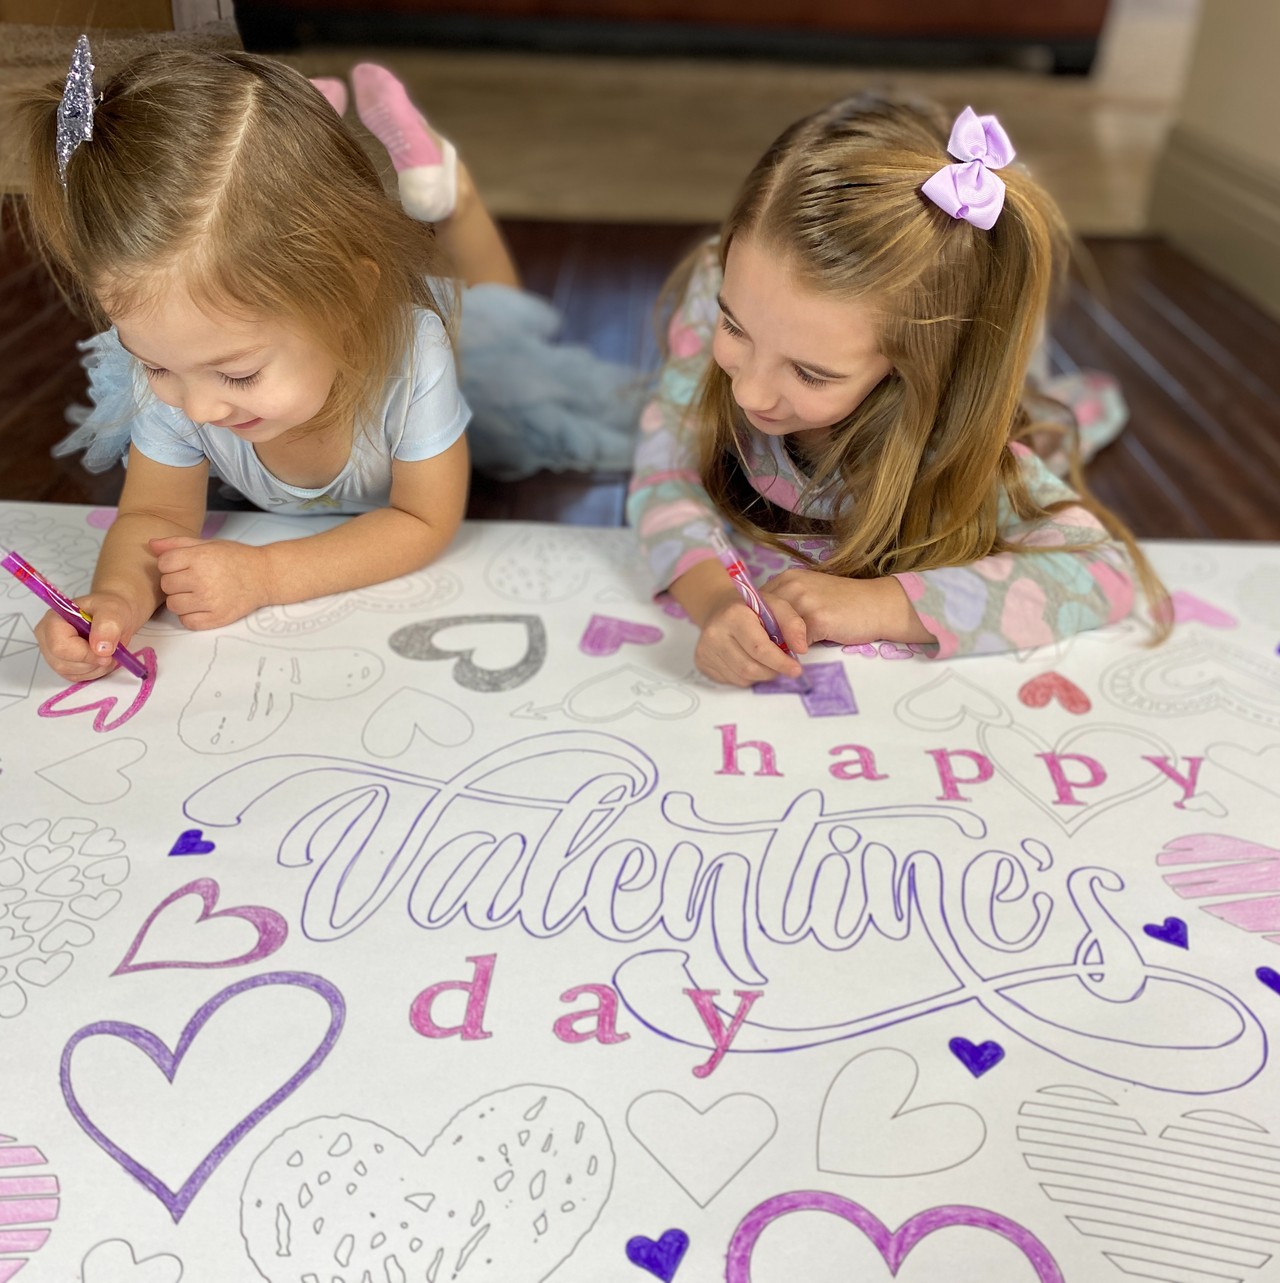 Valentine Hearts Table Size Coloring Sheet